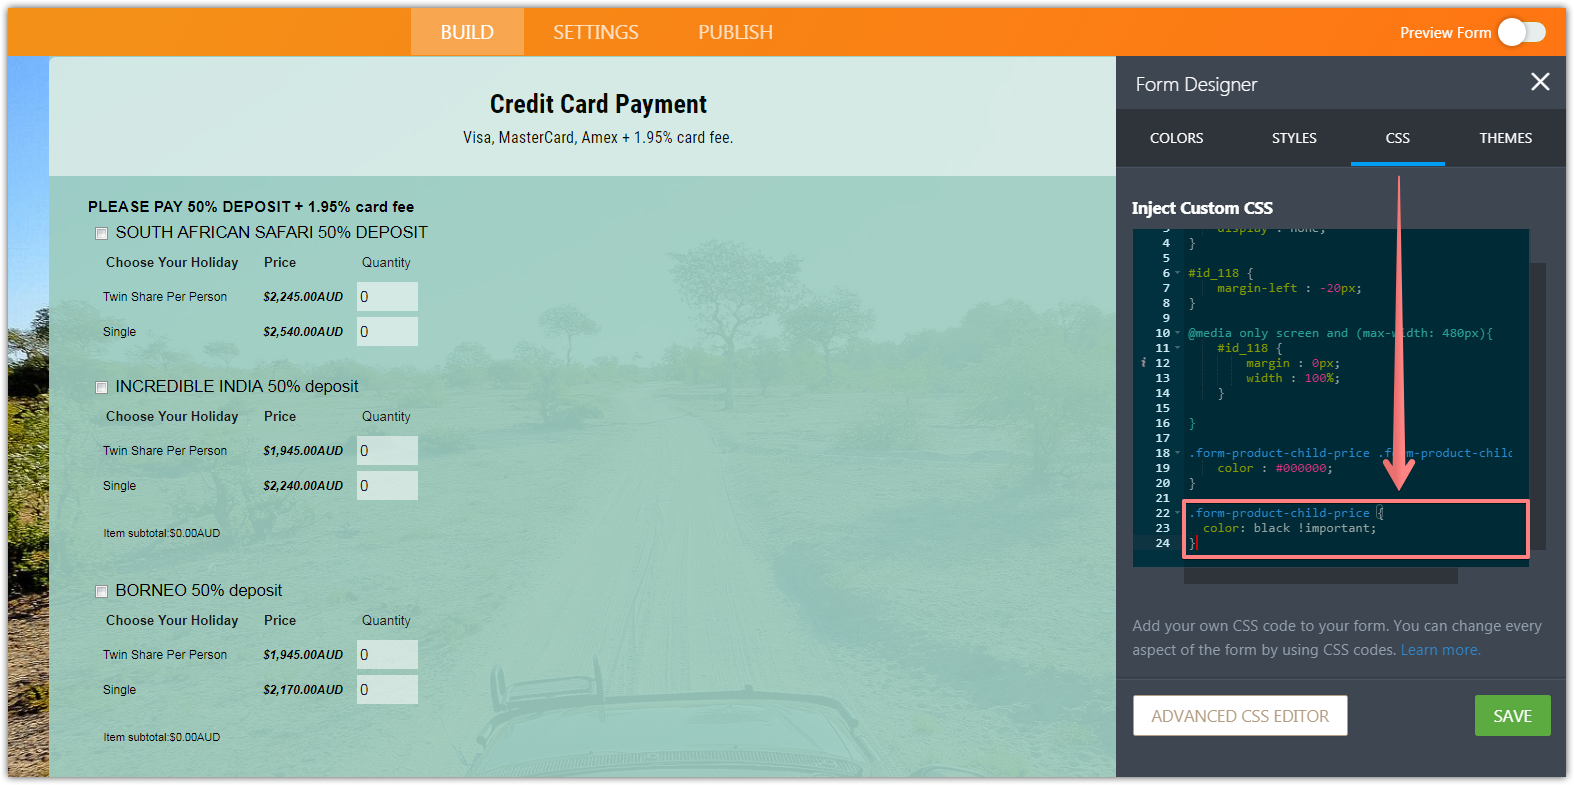 How to change color of price in payment field Image 1 Screenshot 20